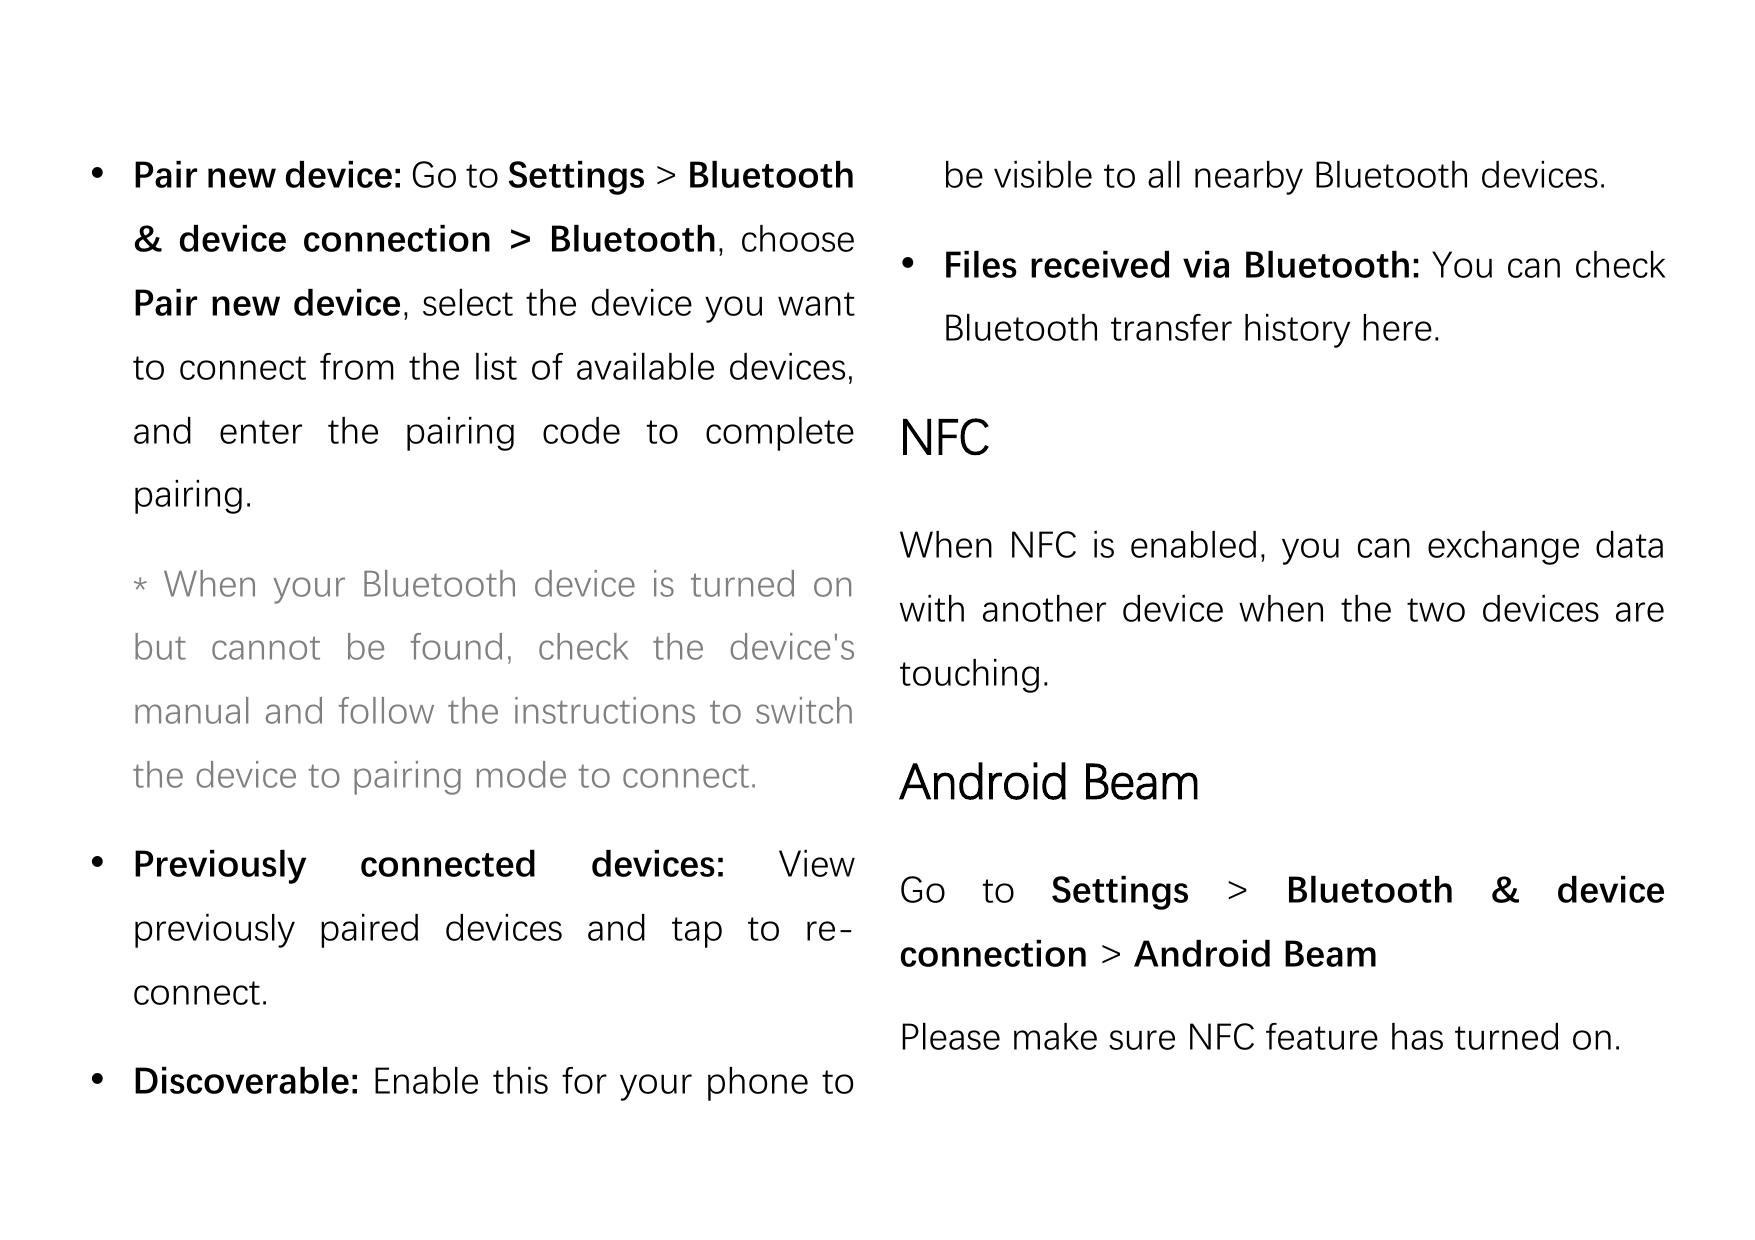  Pair new device: Go to Settings > Bluetooth& device connection > Bluetooth, choosePair new device, select the device you wantt